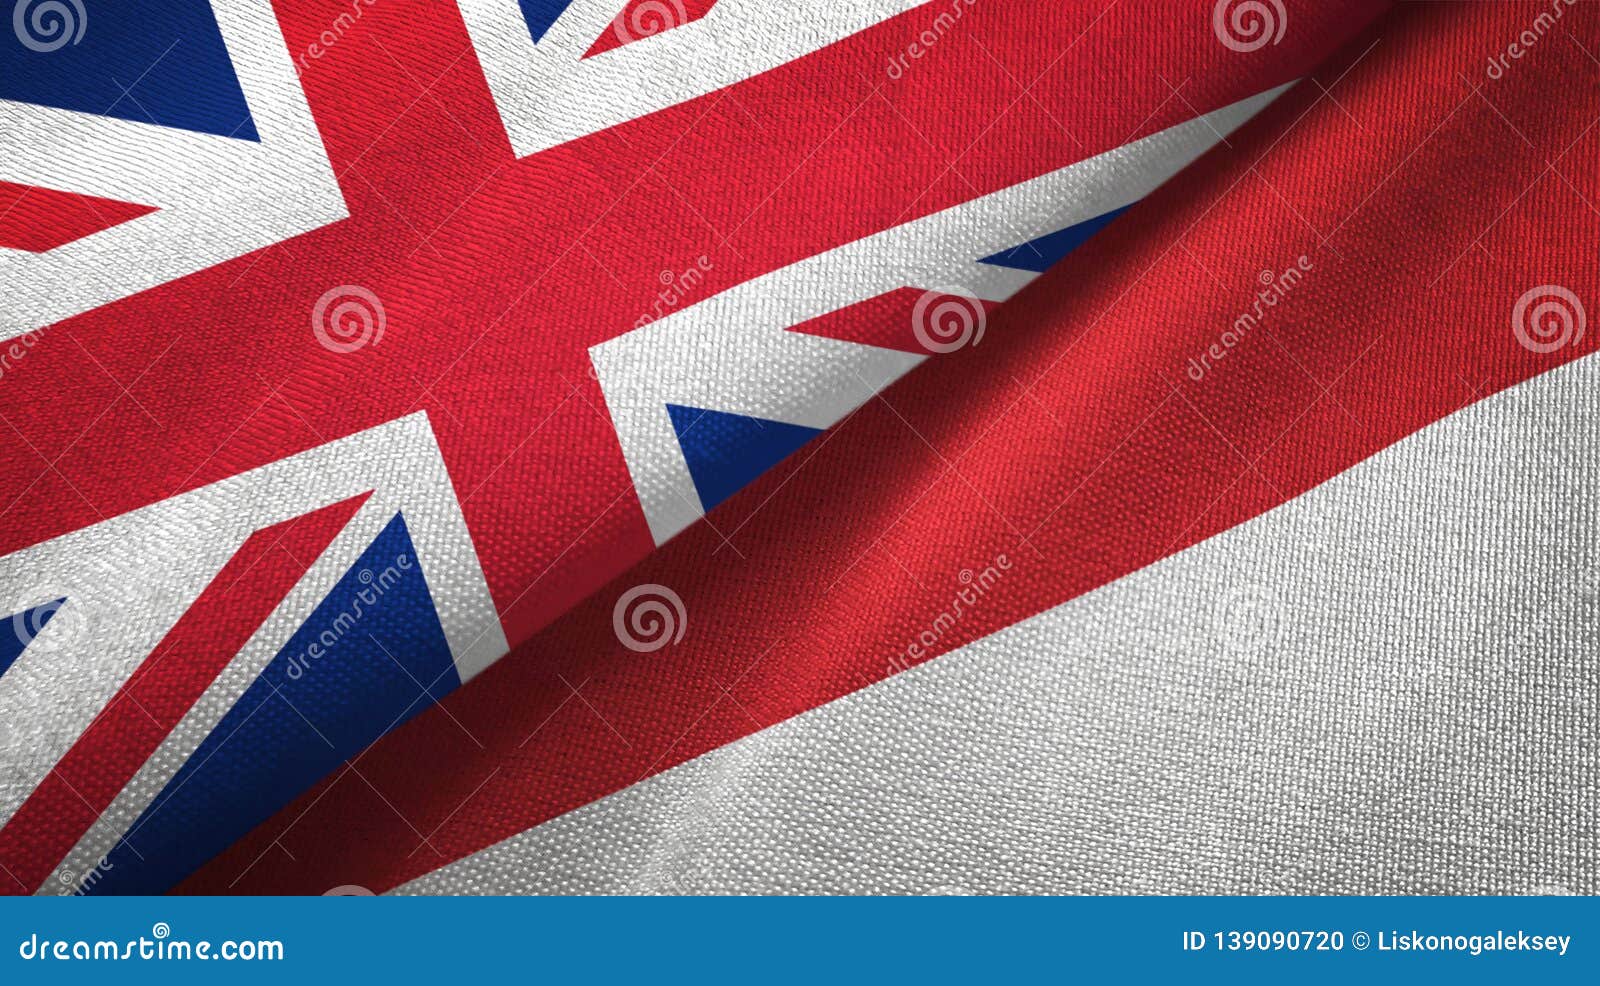 United Kingdom And United Kingdom And Indonesia Two Flags Textile Cloth Stock Illustration Illustration Of Flags Double